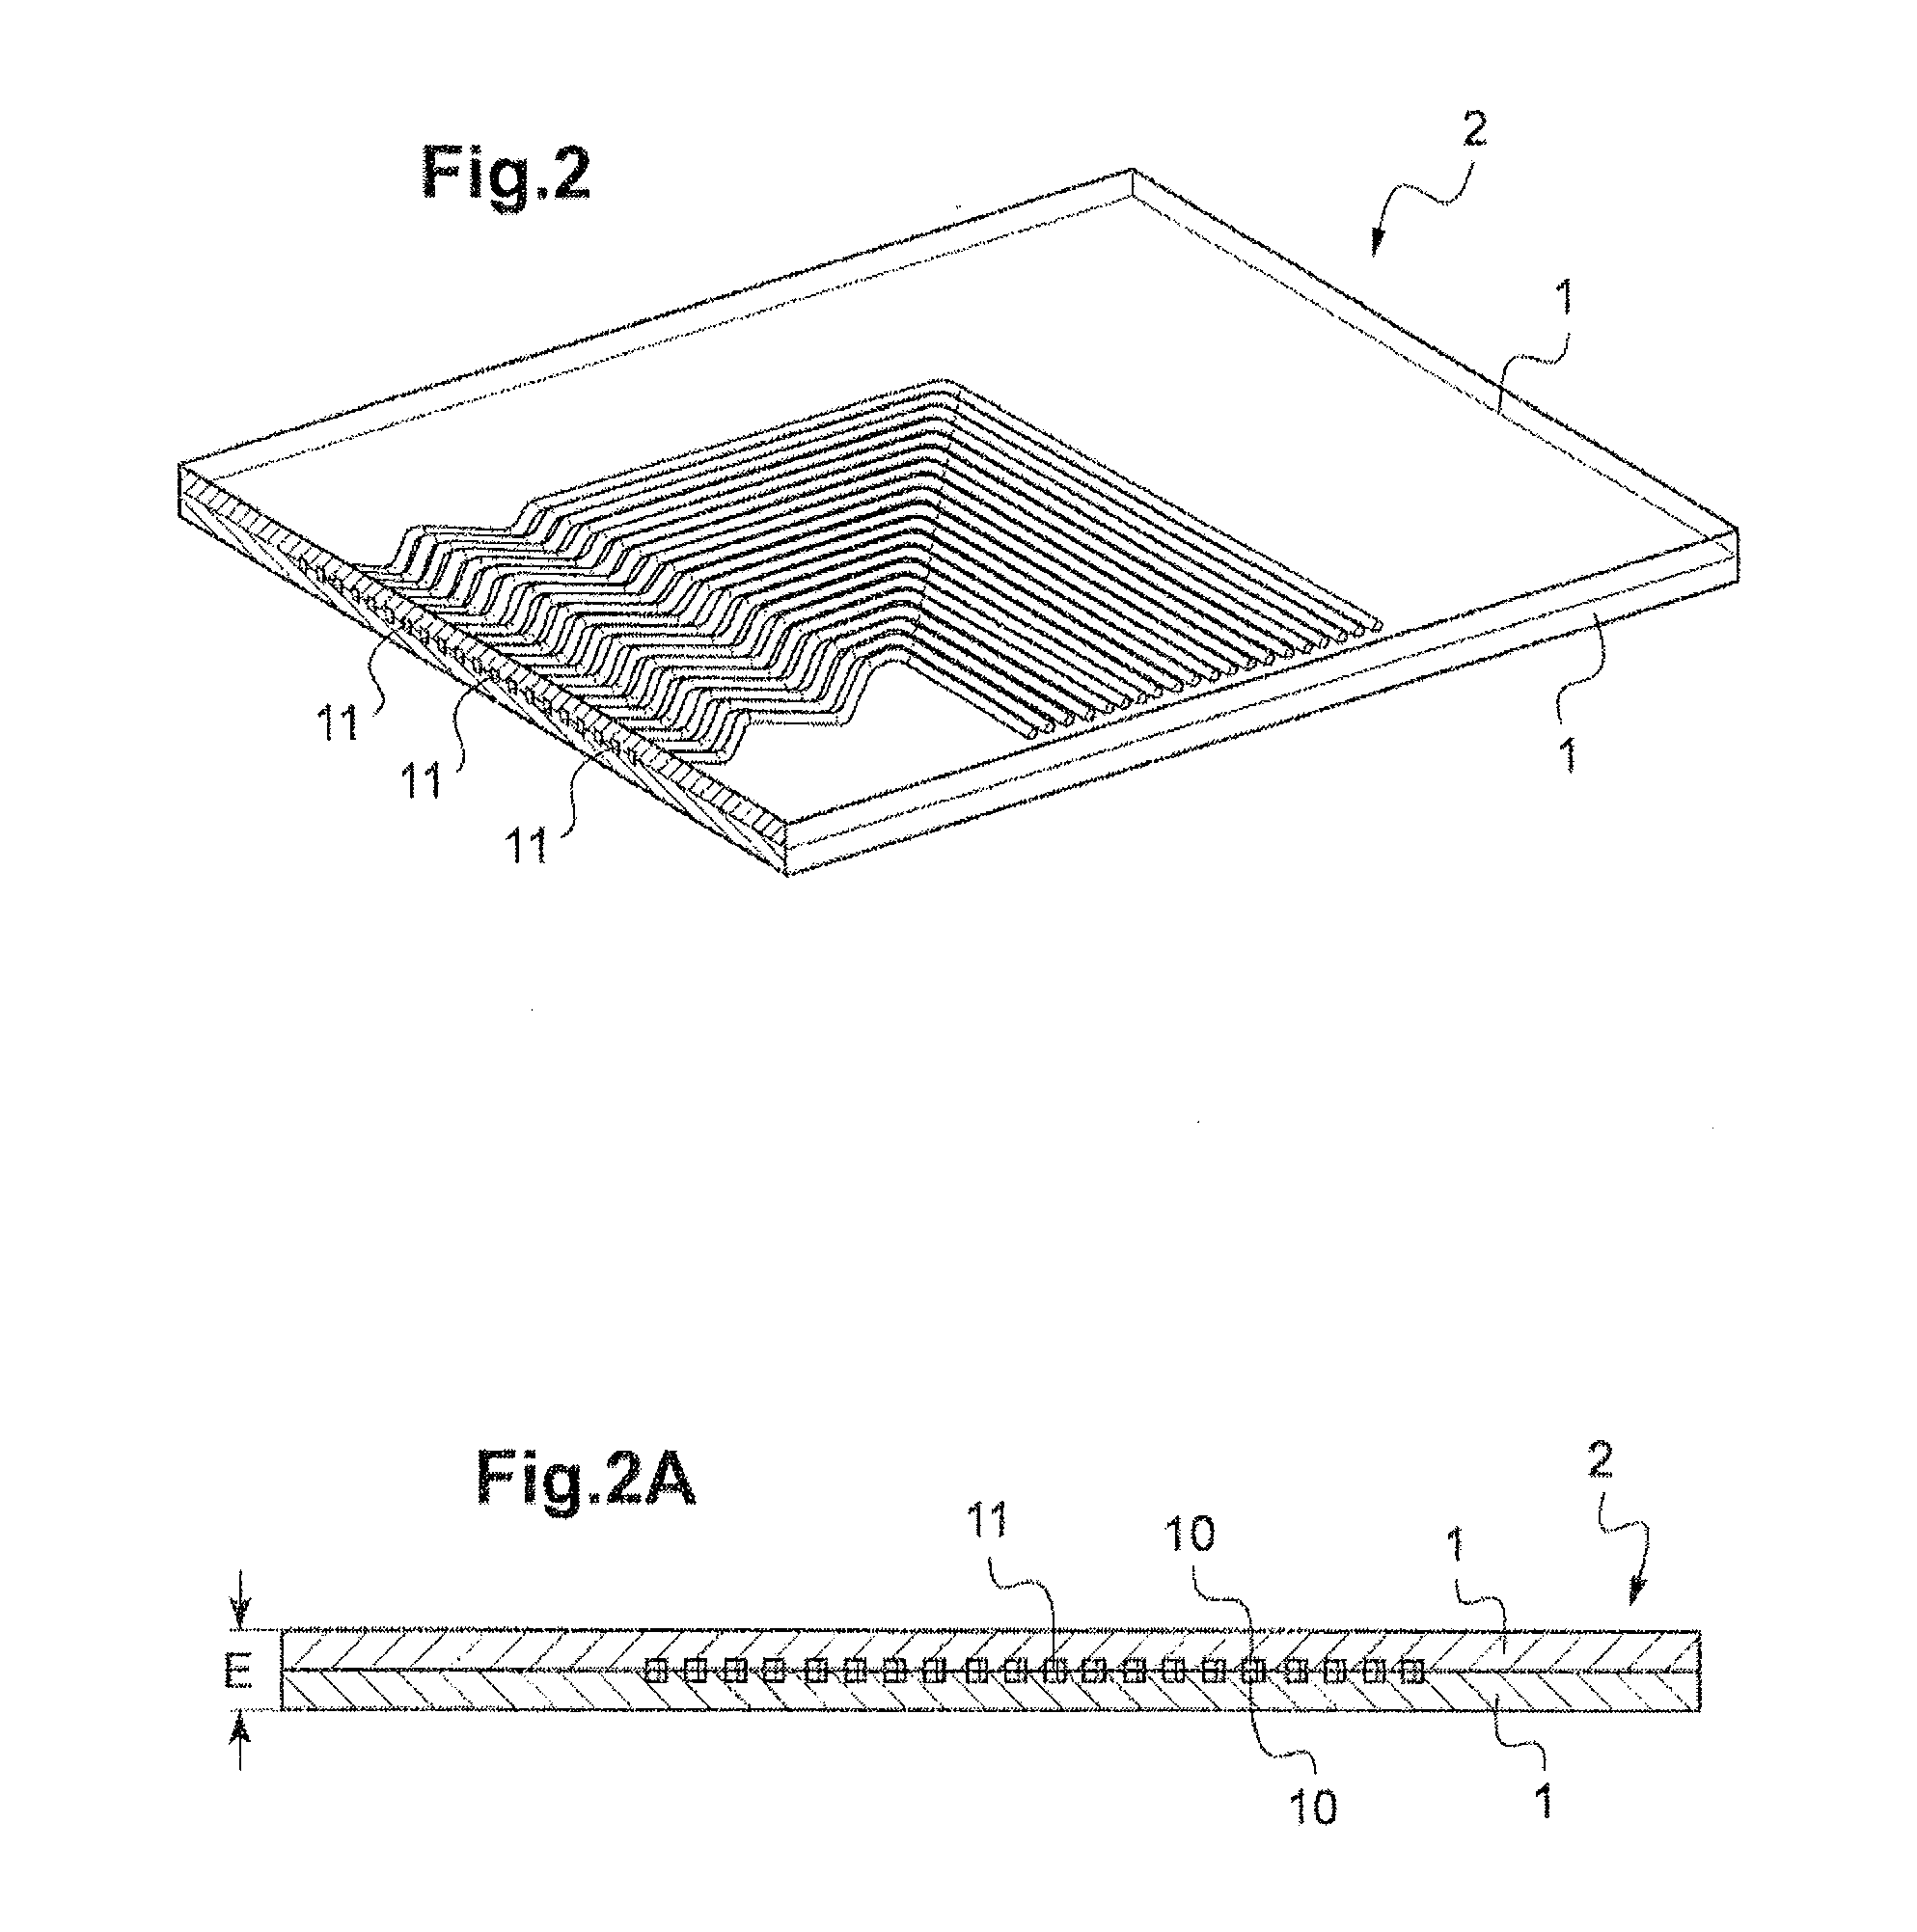 Method for producing a heat exchanger module having at least two fluid flow circuits